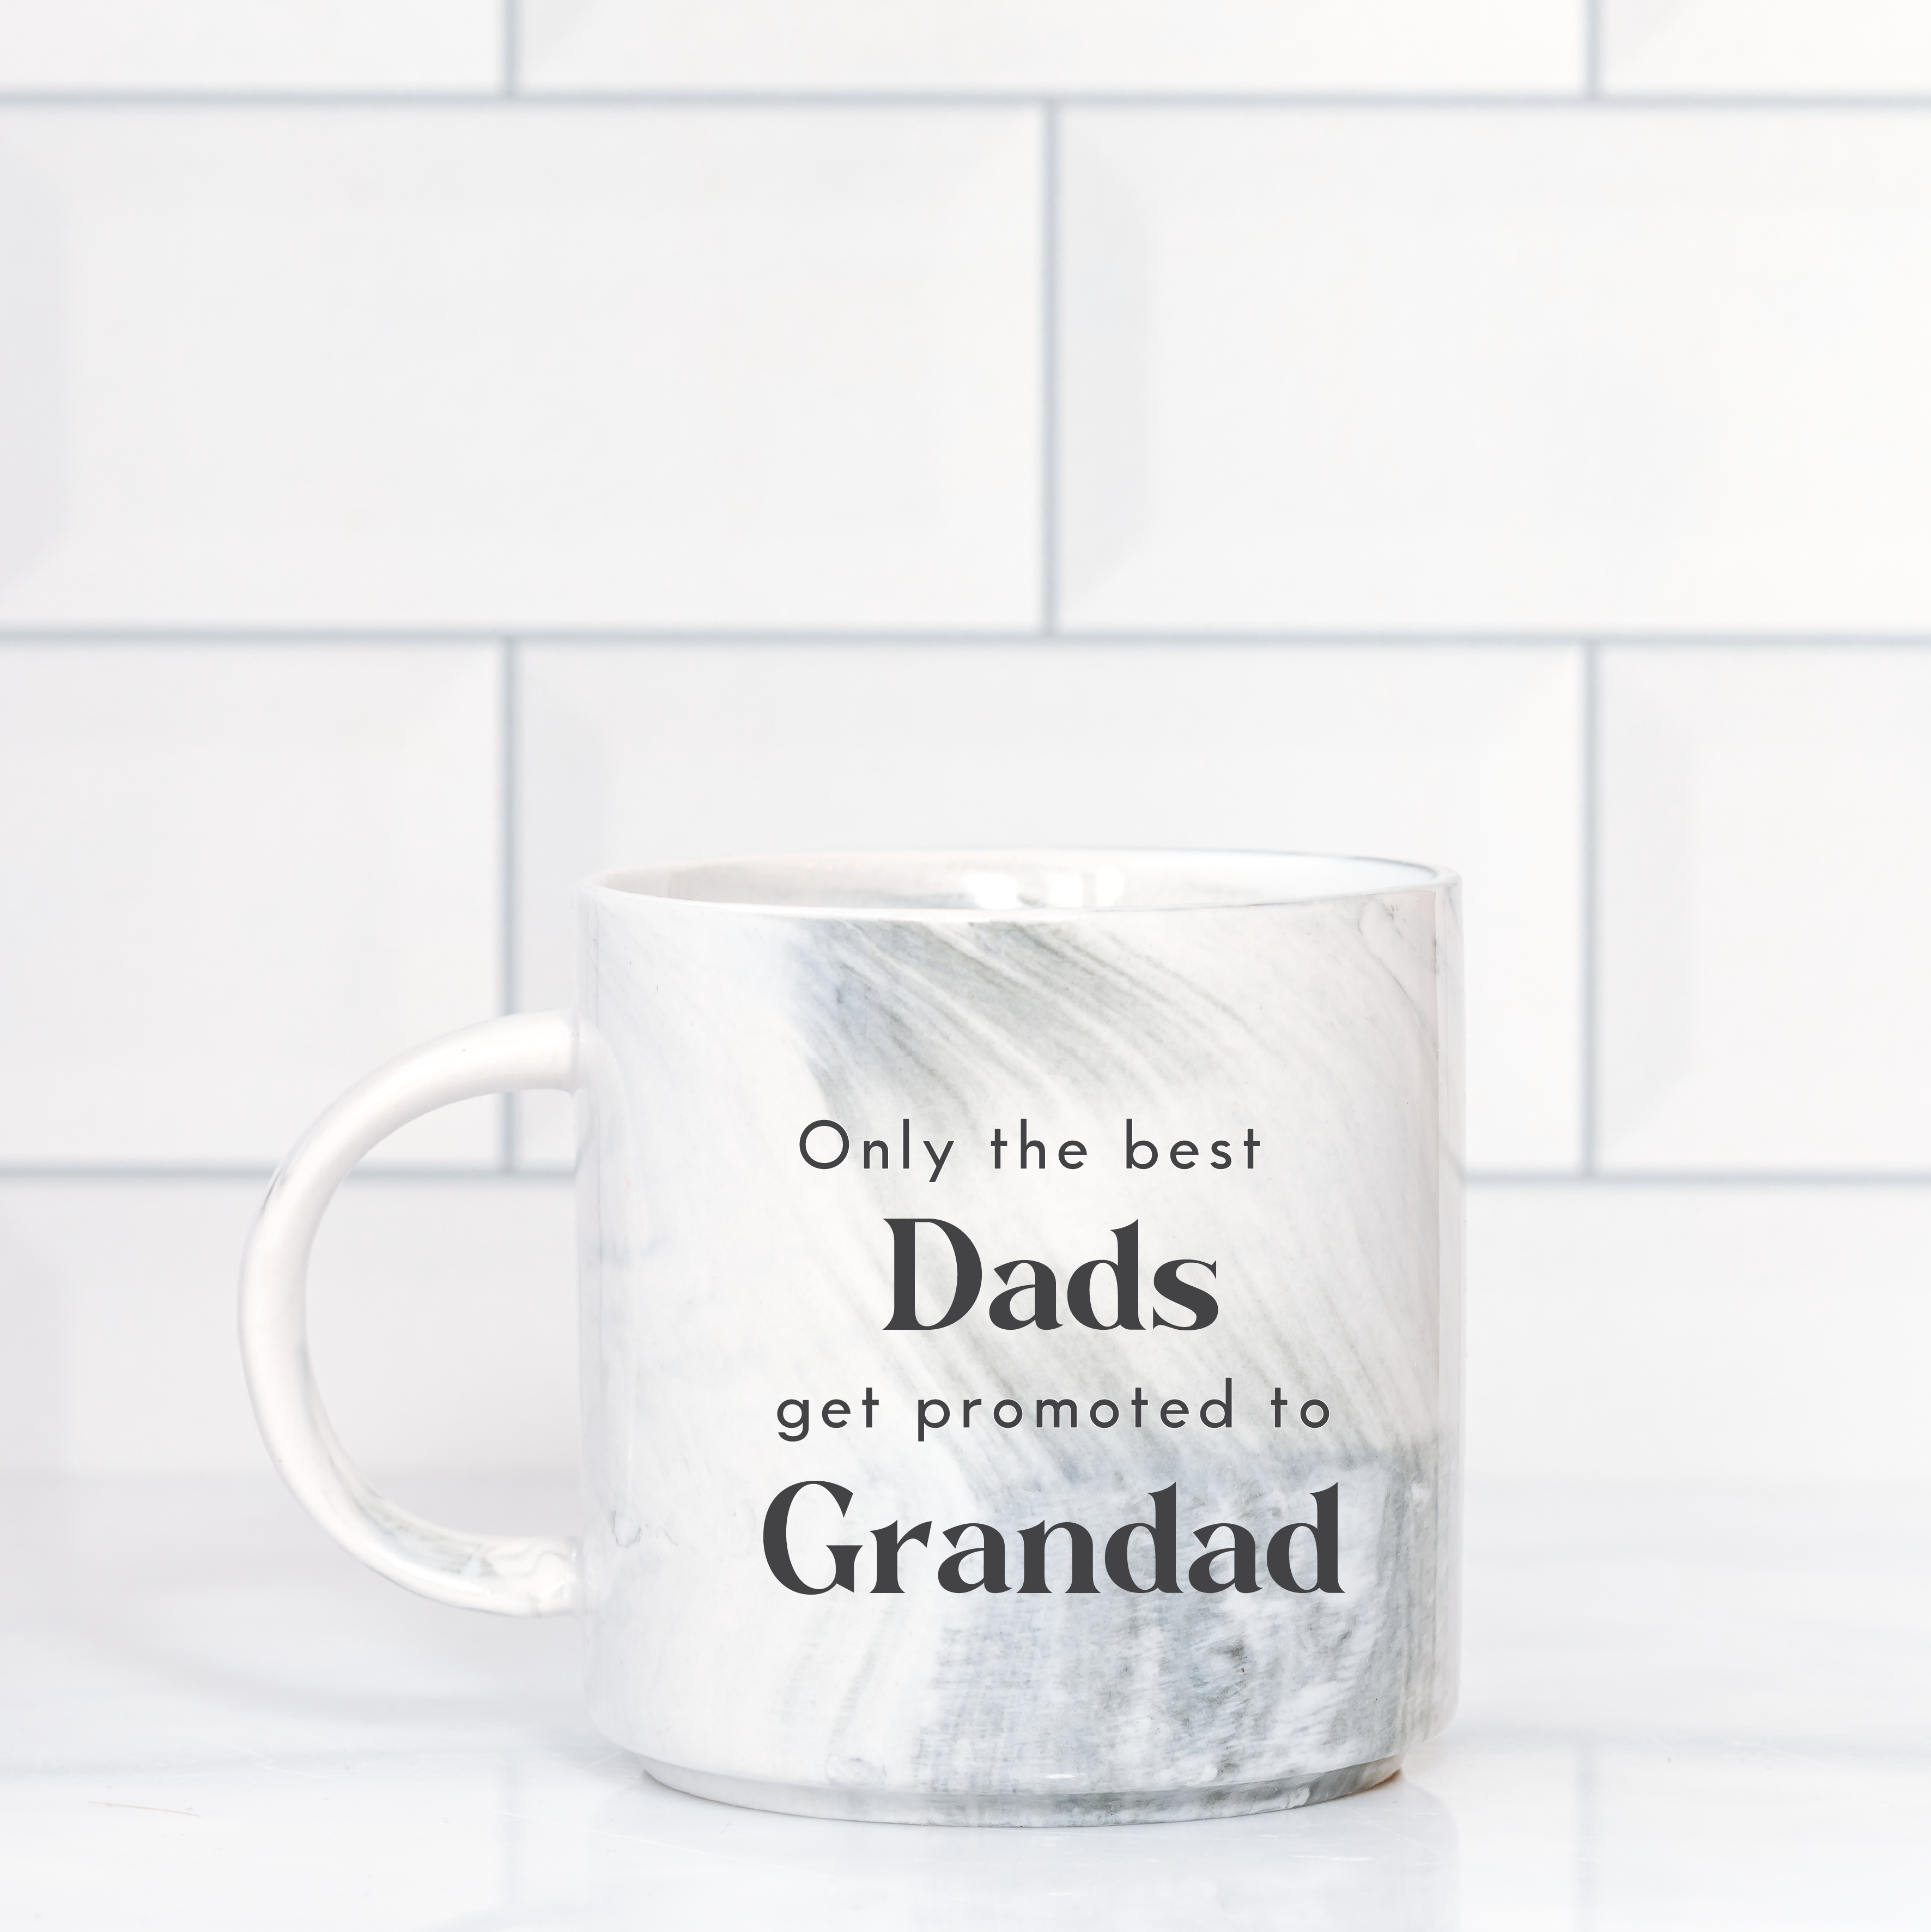 Luxury Father's Day Gifts